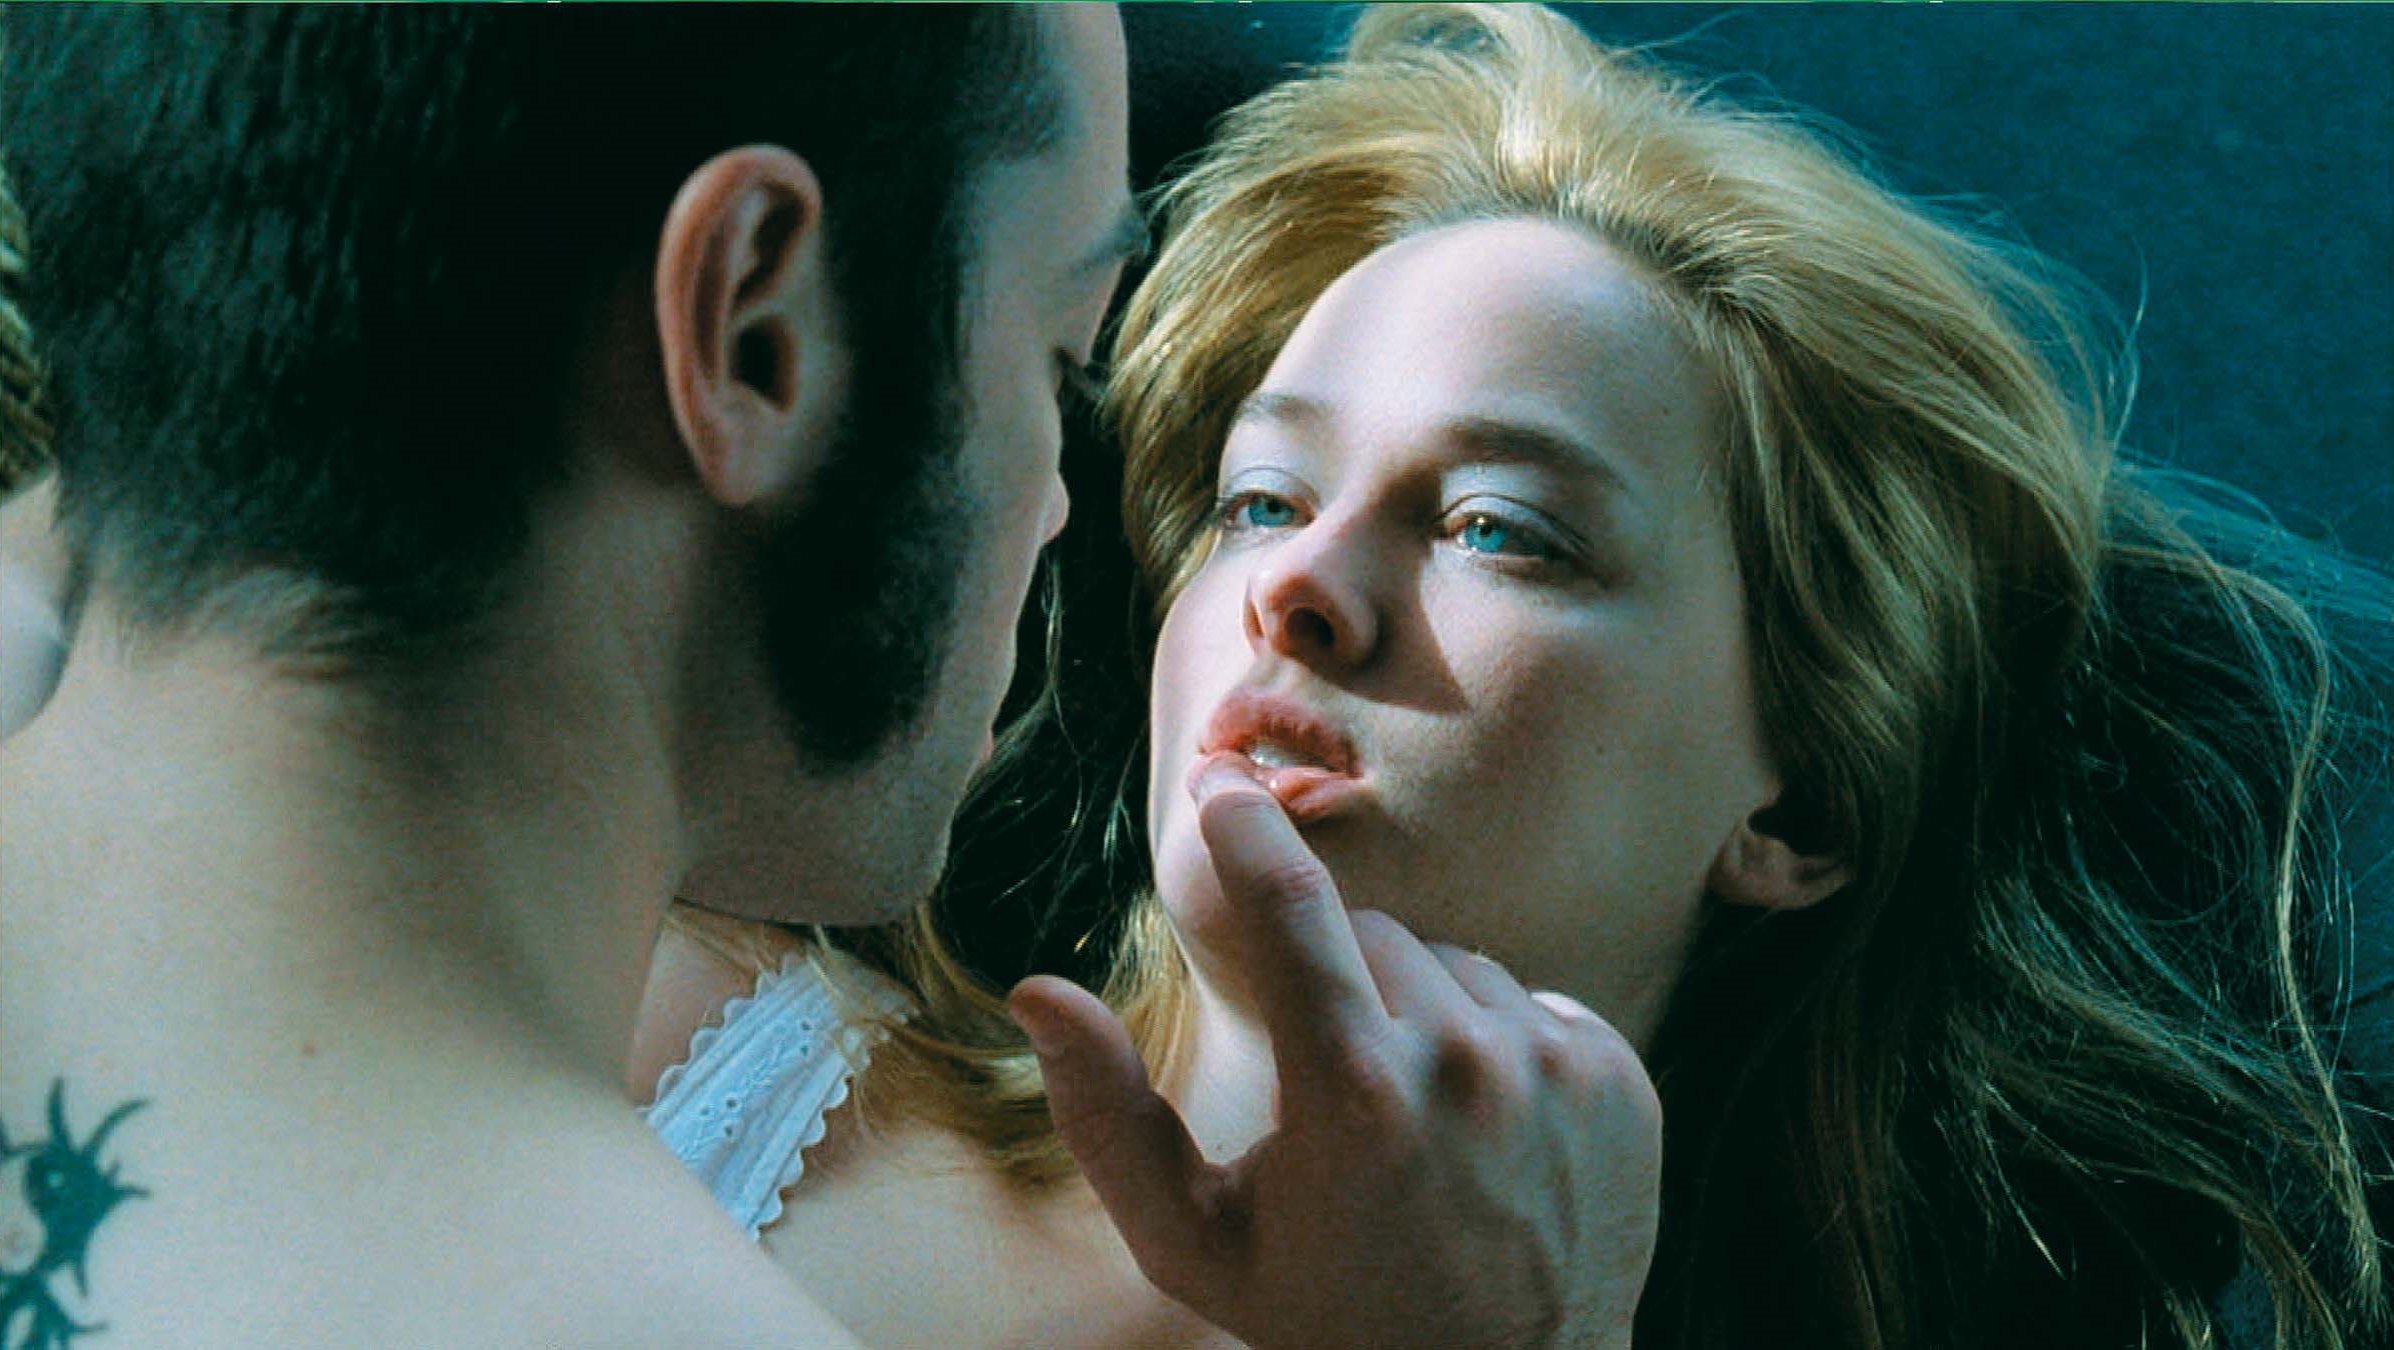 Jess Weixler as the teenager with the vagina dentata and her stepbrother John Hensley in Teeth (2007)